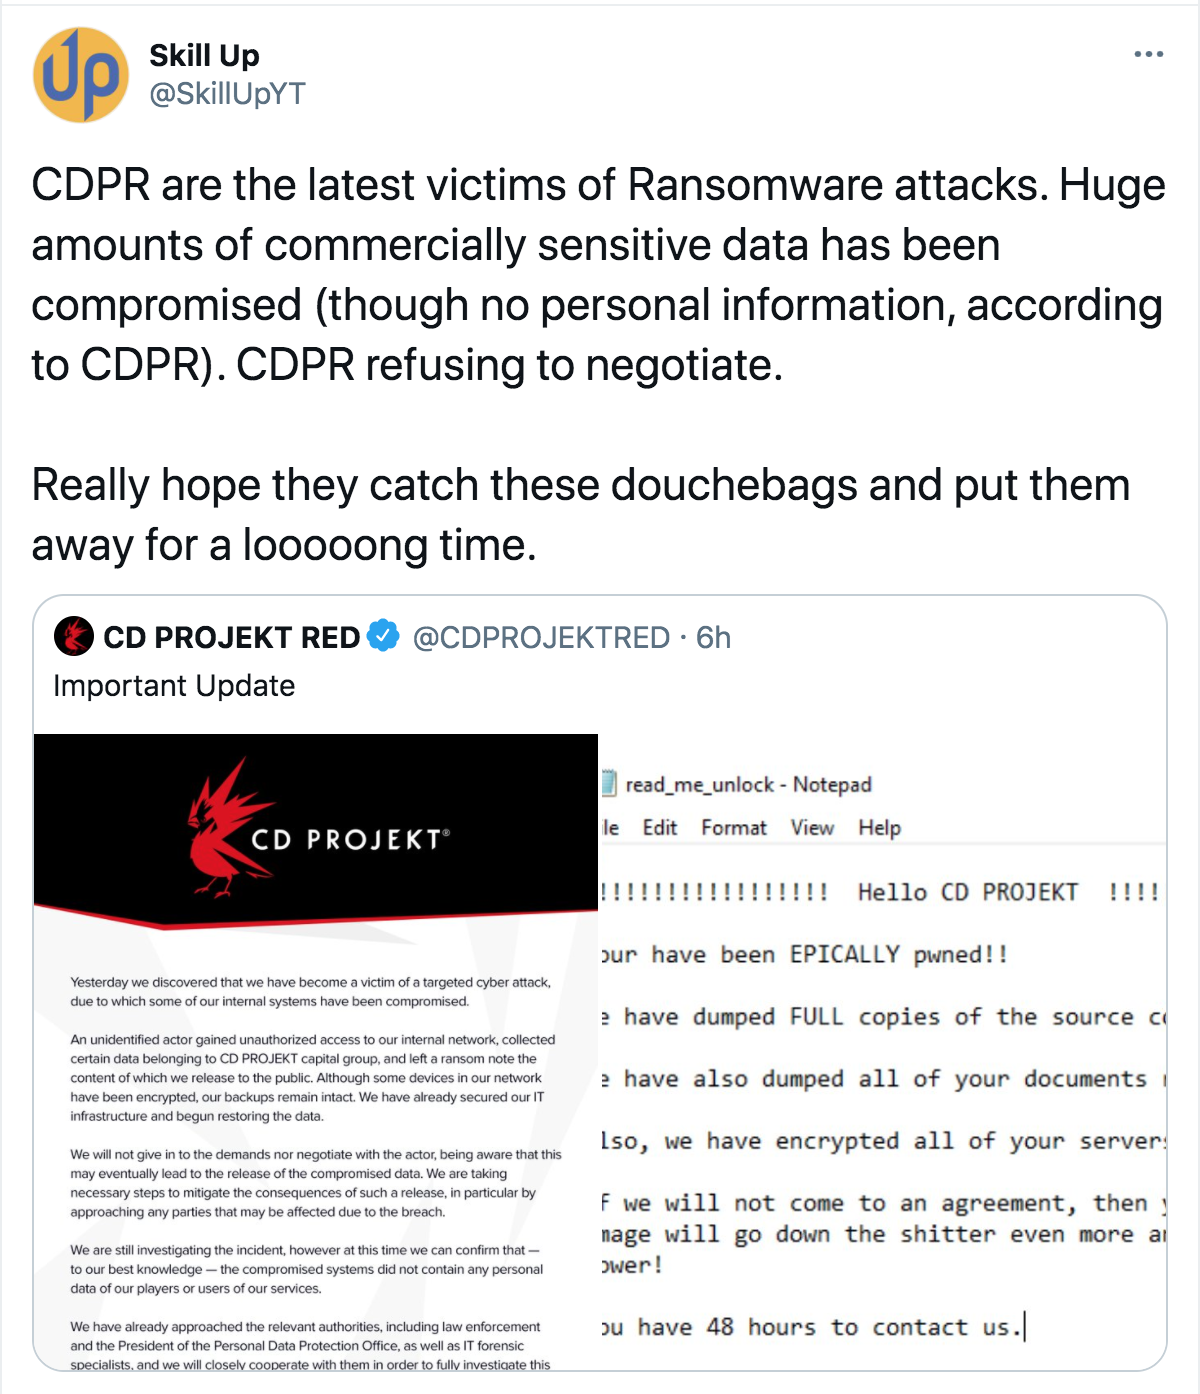 web page - Skill Up Cdpr are the latest victims of Ransomware attacks. Huge amounts of commercially sensitive data has been compromised though no personal information, according to Cdpr. Cdpr refusing to negotiate. Really hope they catch these douchebags 